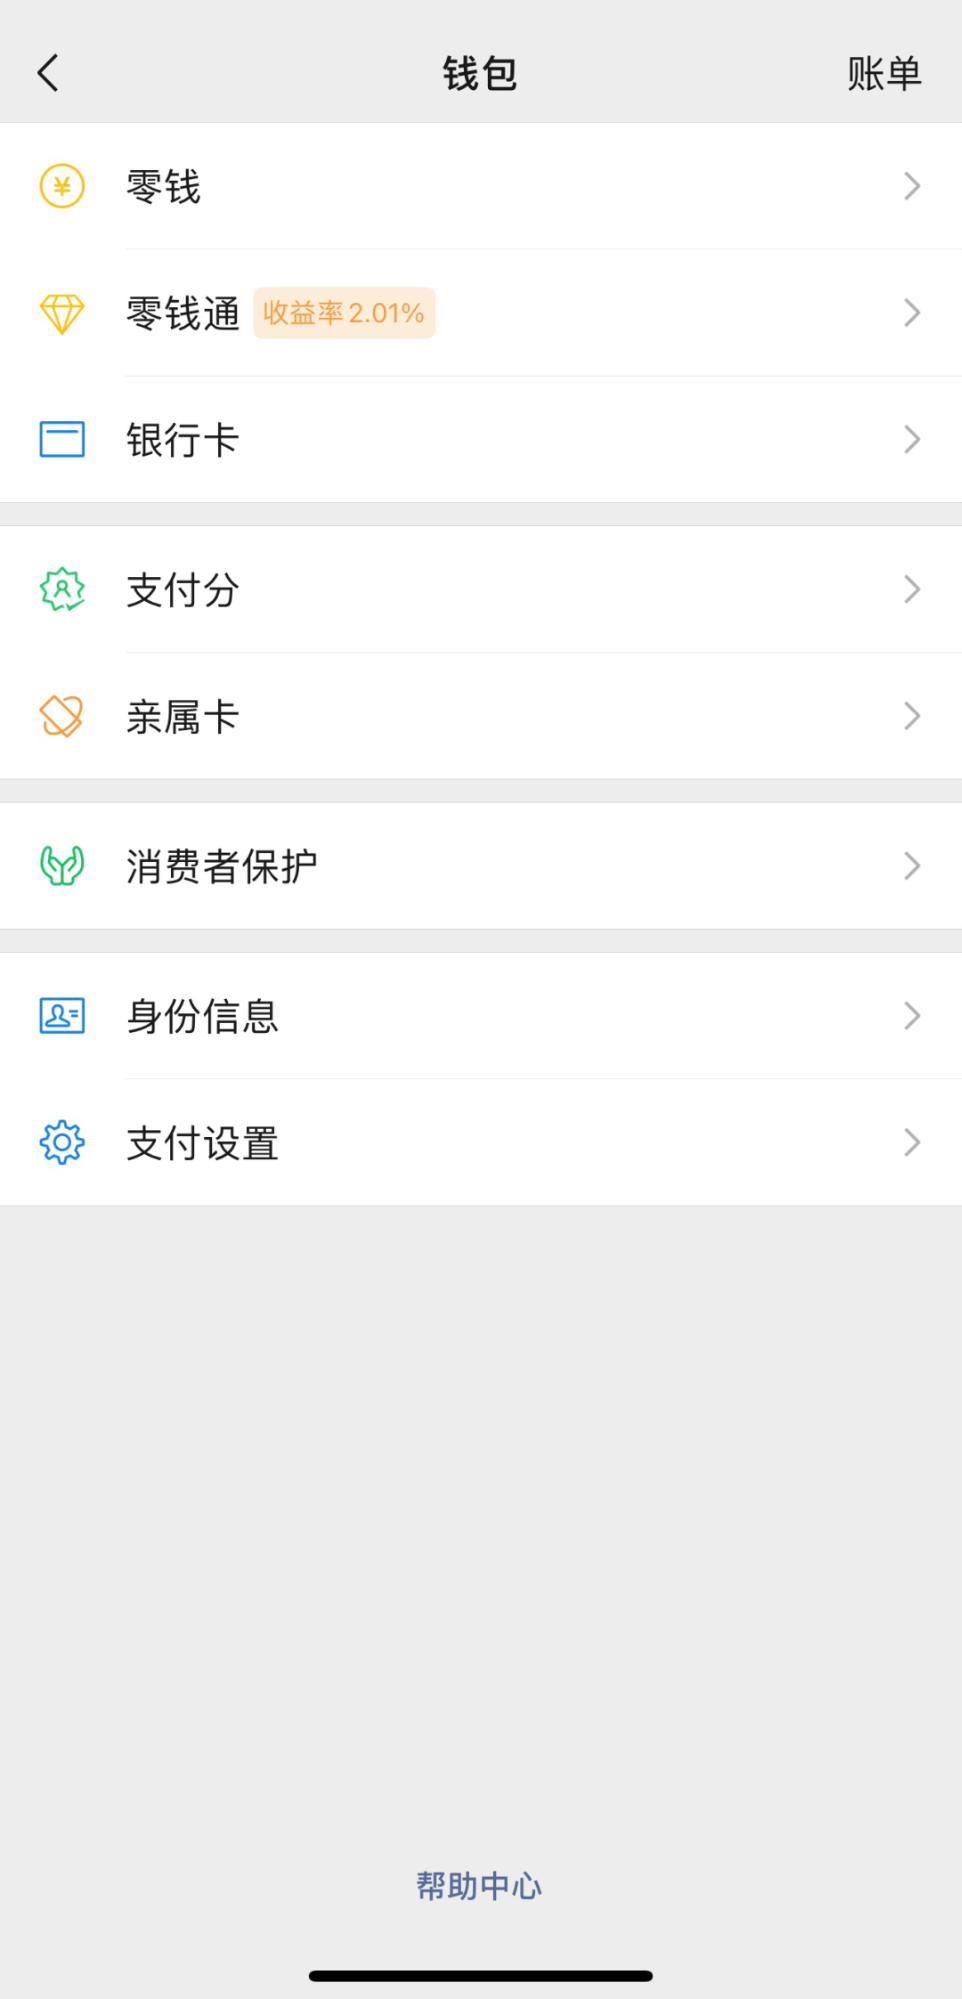 how to add wise card to wechat step 1